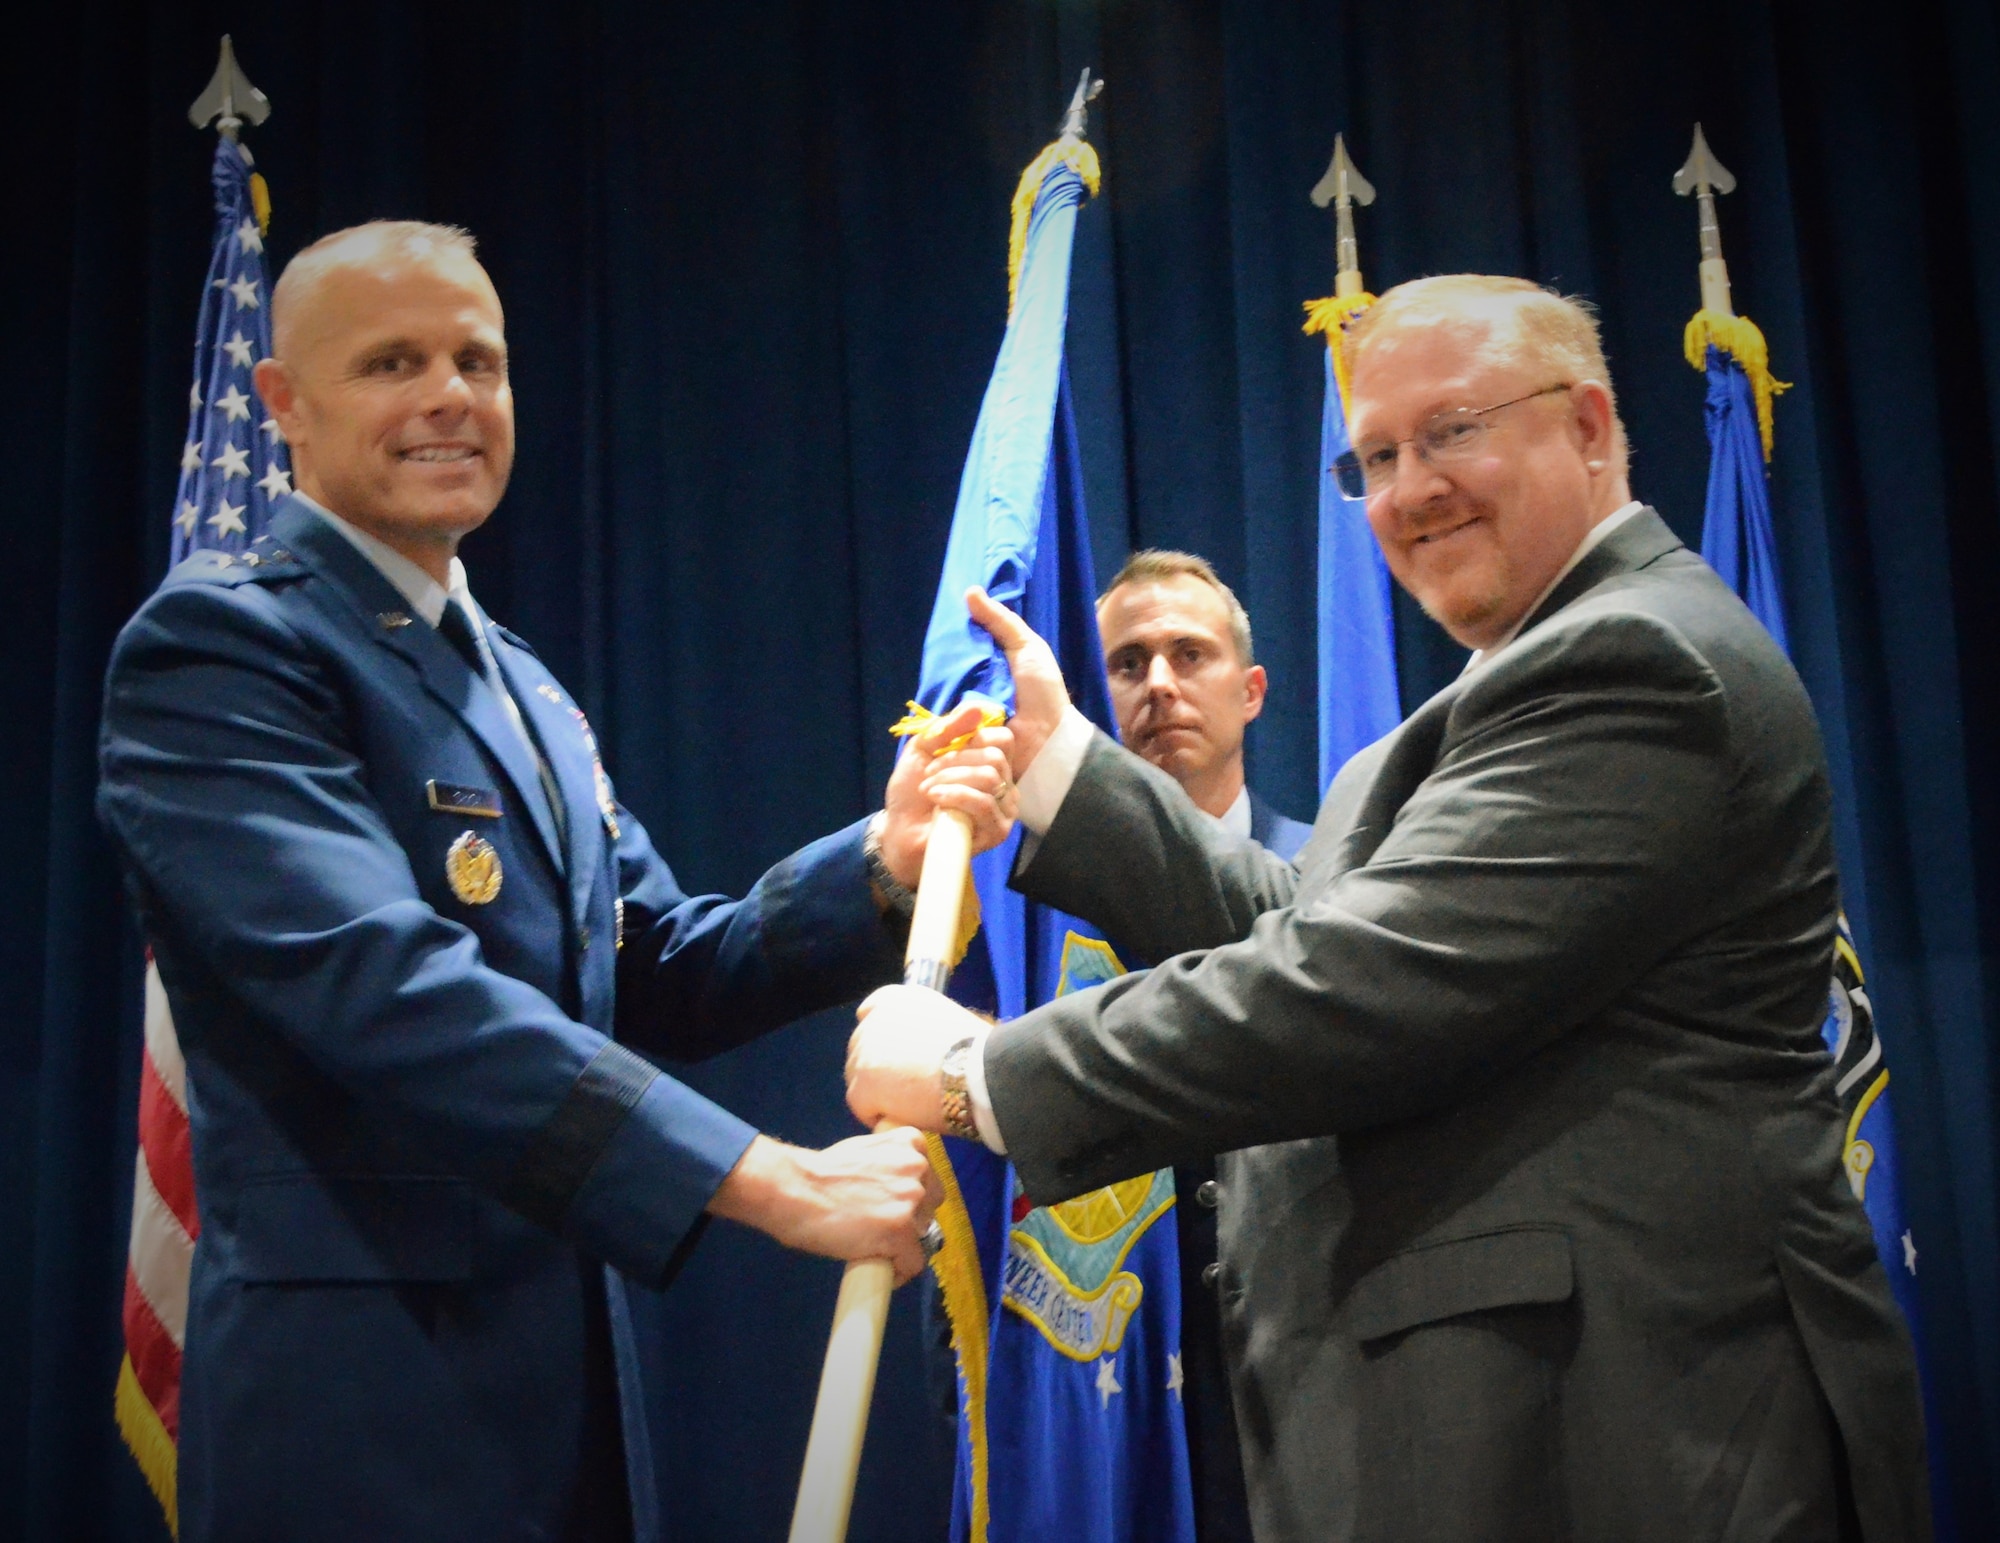 Terry Edwards accepts the Air Force Civil Engineer Center flag from Maj. Gen. Bradley D. Spacy, Commander, Air Force Installation and Mission Support Center during a change of leadership ceremony at Lackland Air Force Base, Texas, Oct. 29, 2018.